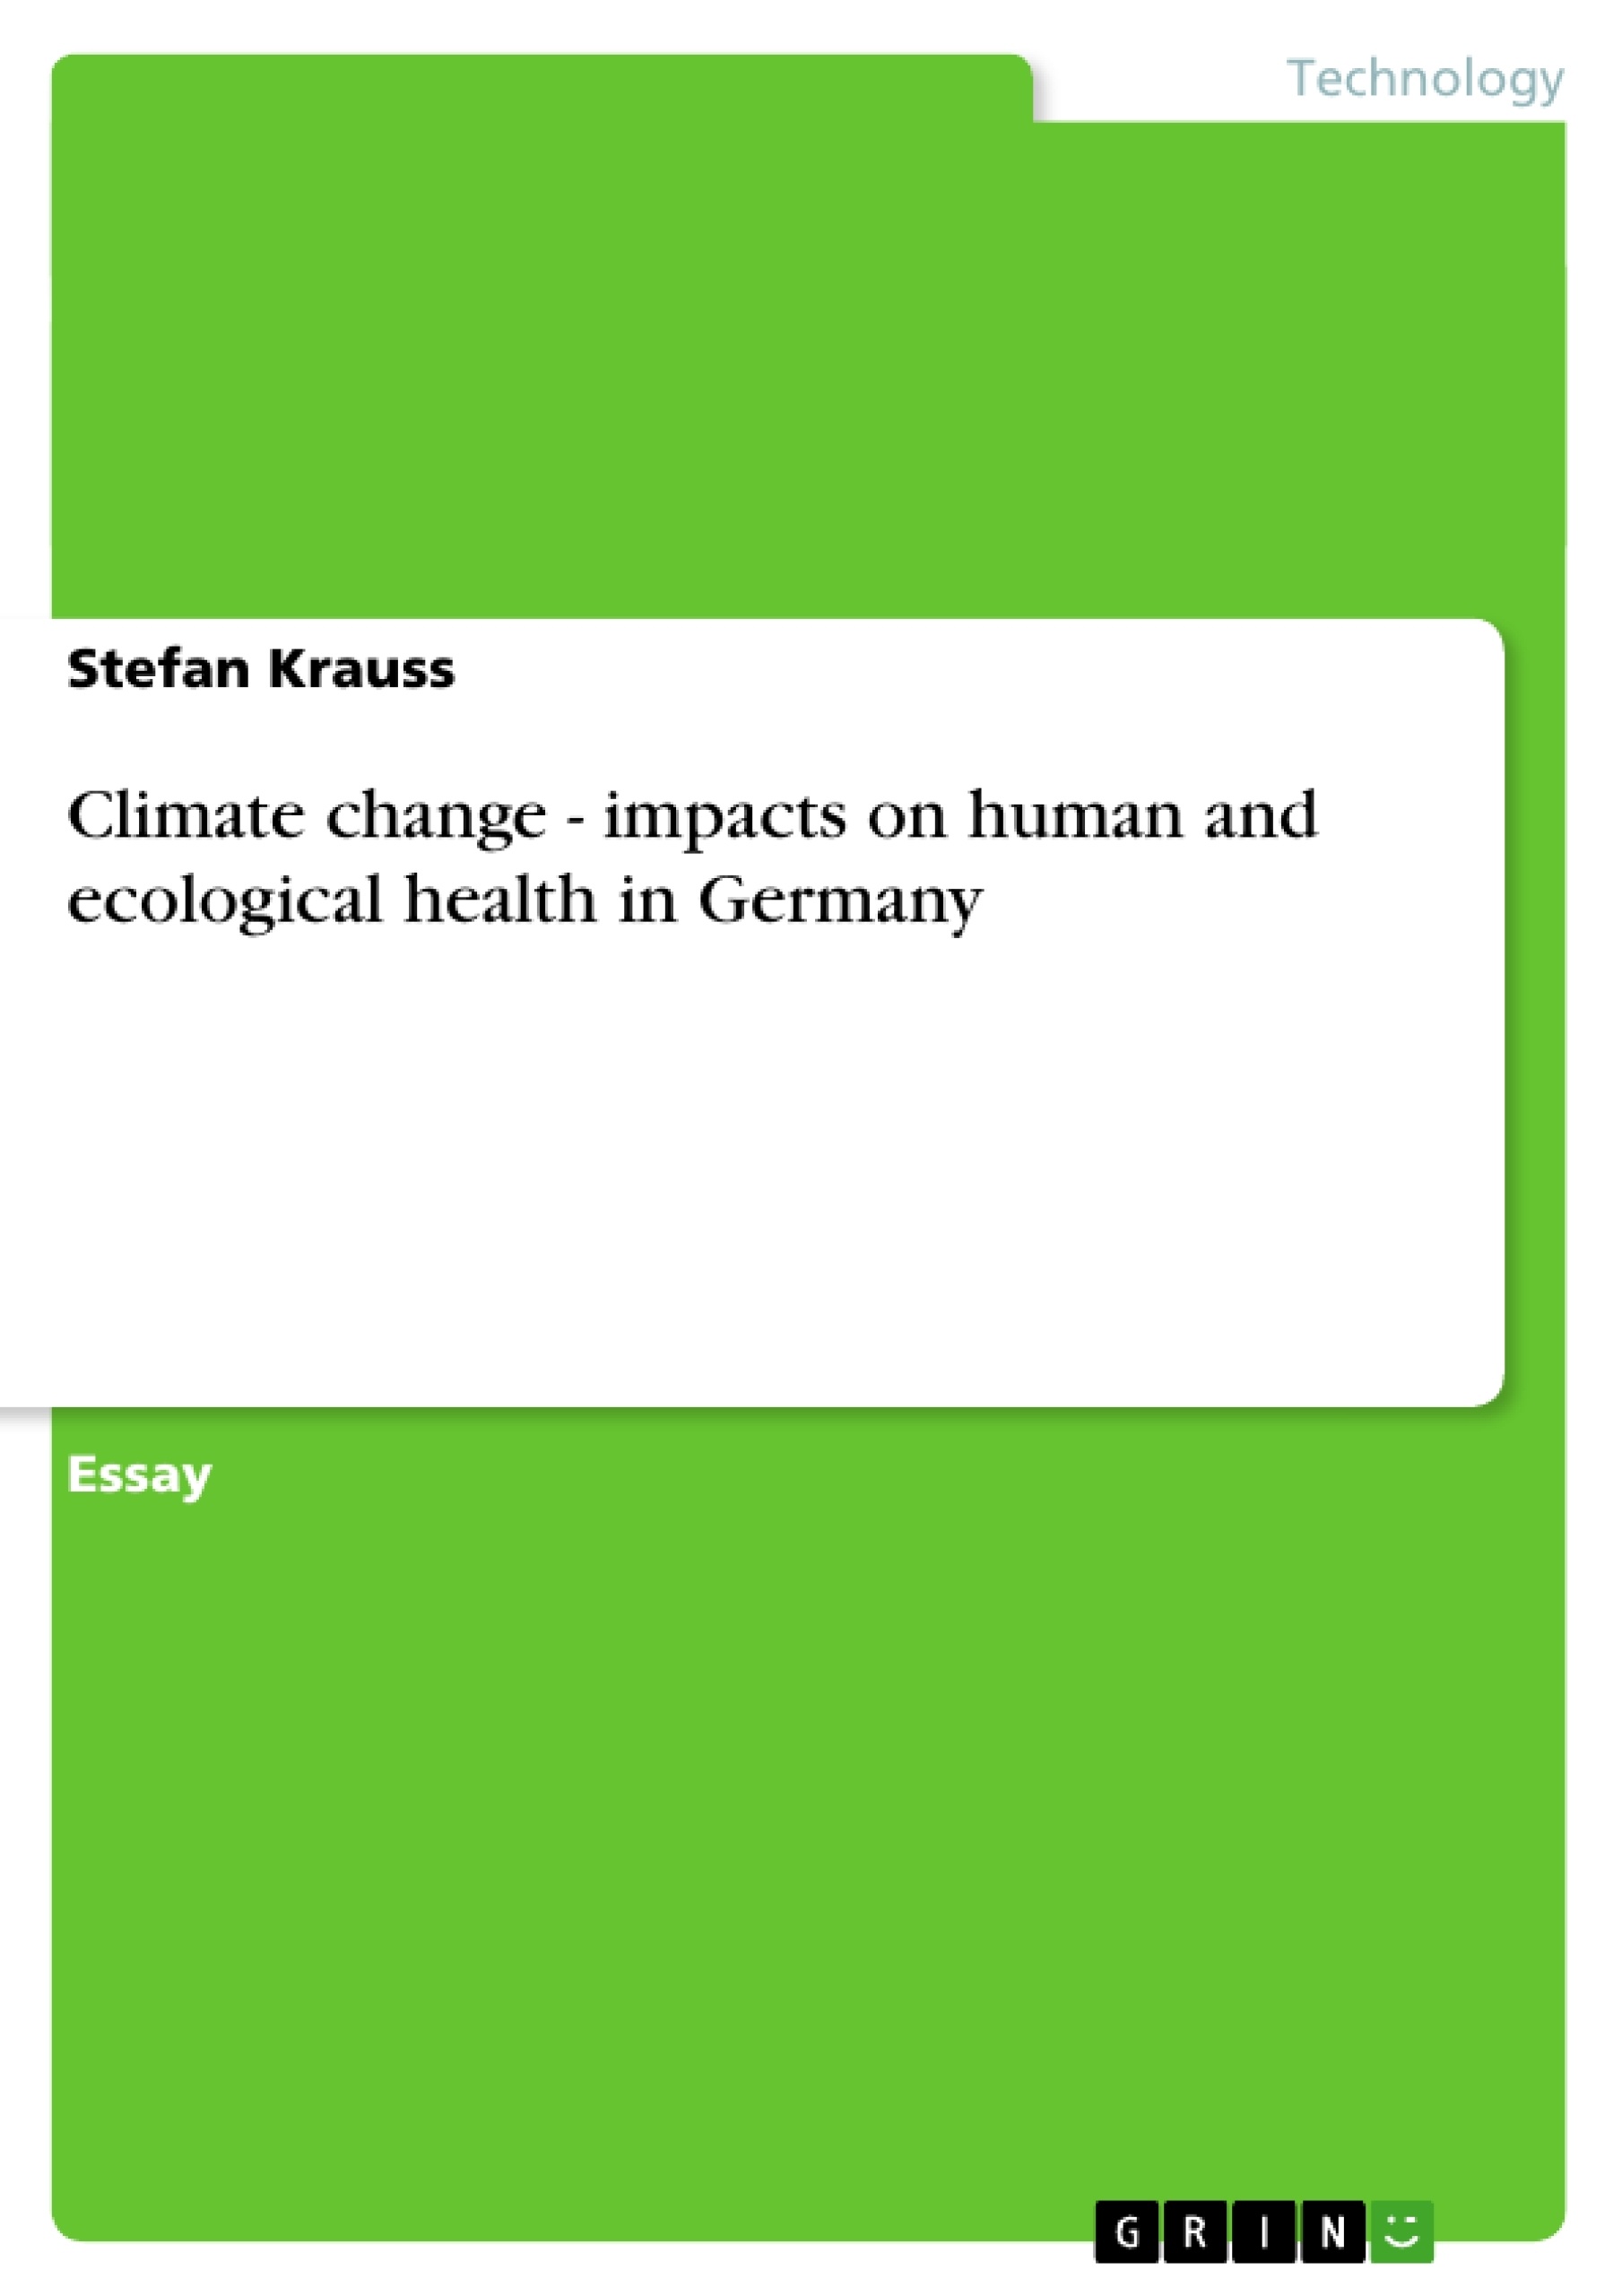 Title: Climate change - impacts on human and ecological health in Germany